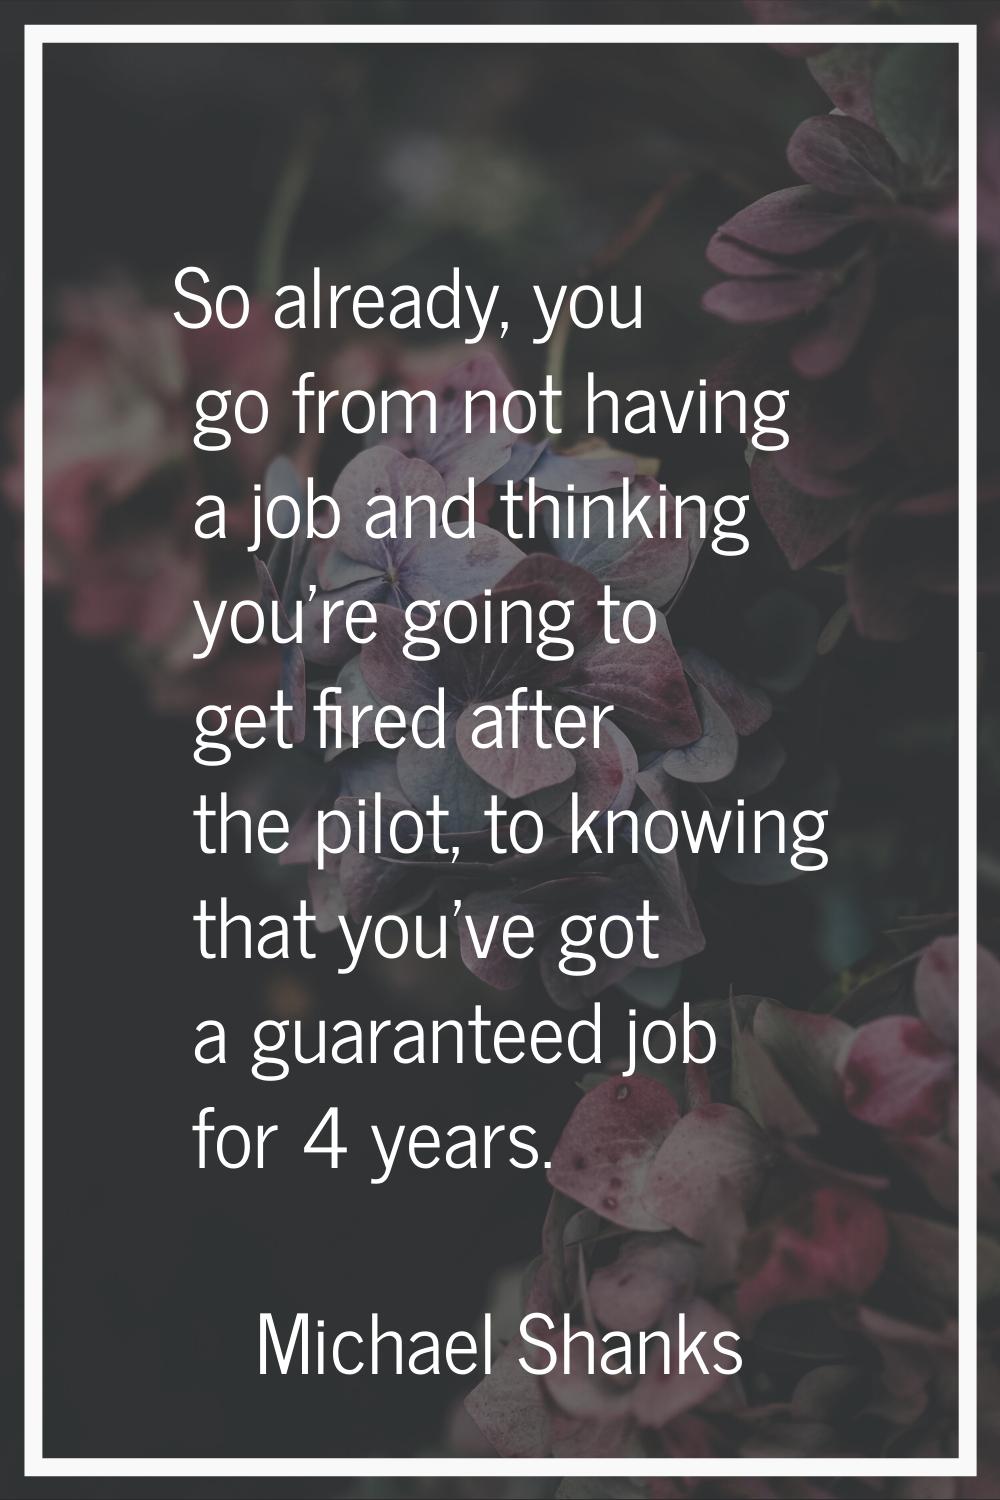 So already, you go from not having a job and thinking you're going to get fired after the pilot, to